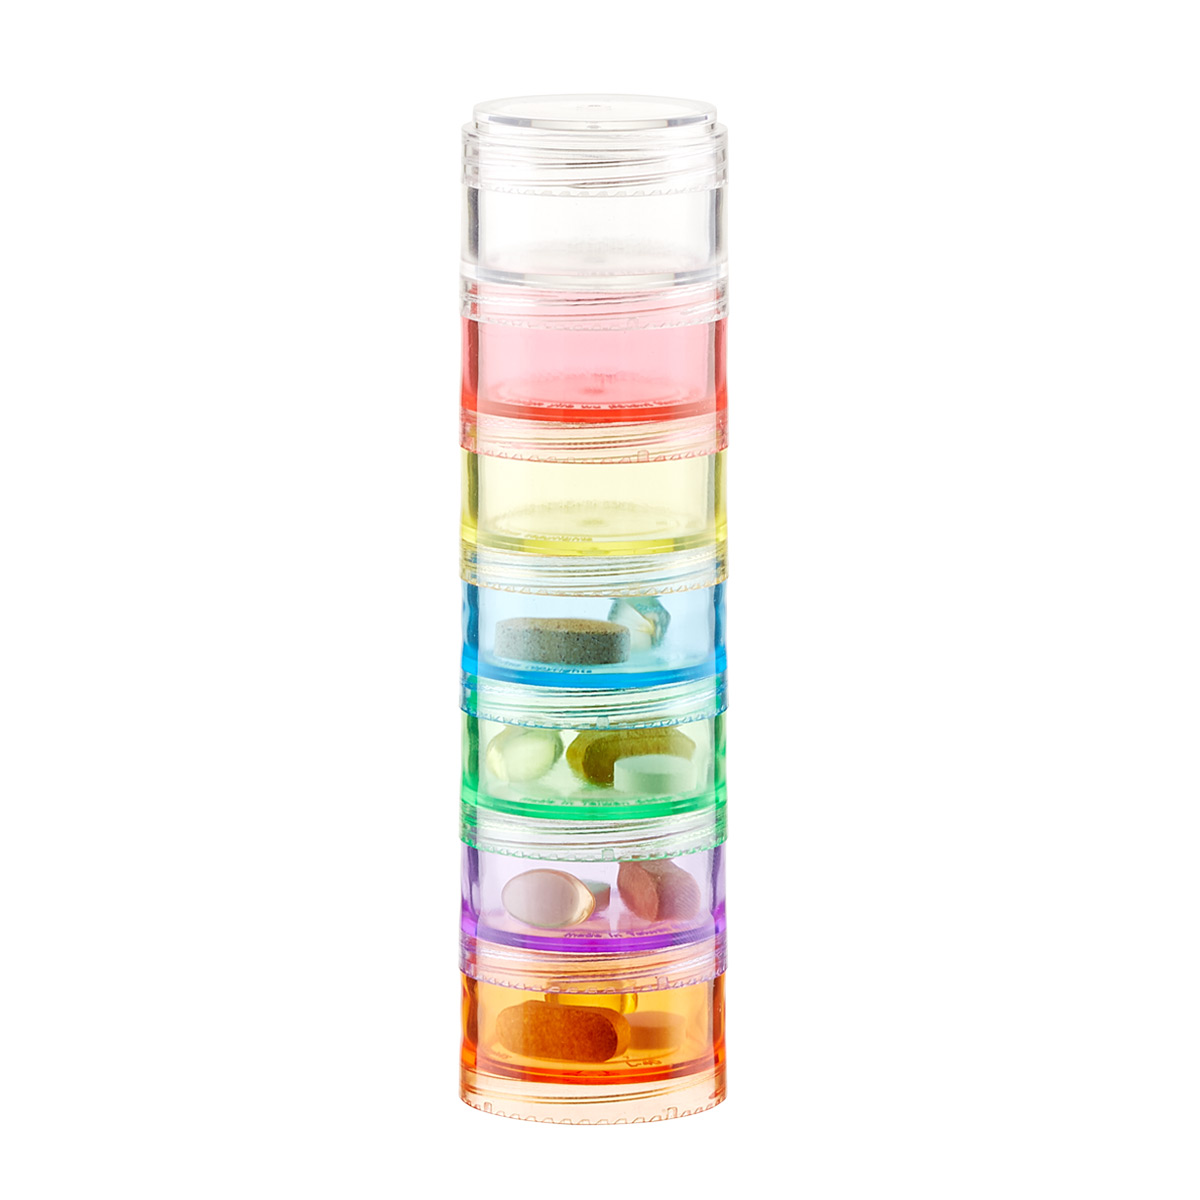 https://www.containerstore.com/catalogimages/342920/10074571-stacking-pill-organizer-mul.jpg